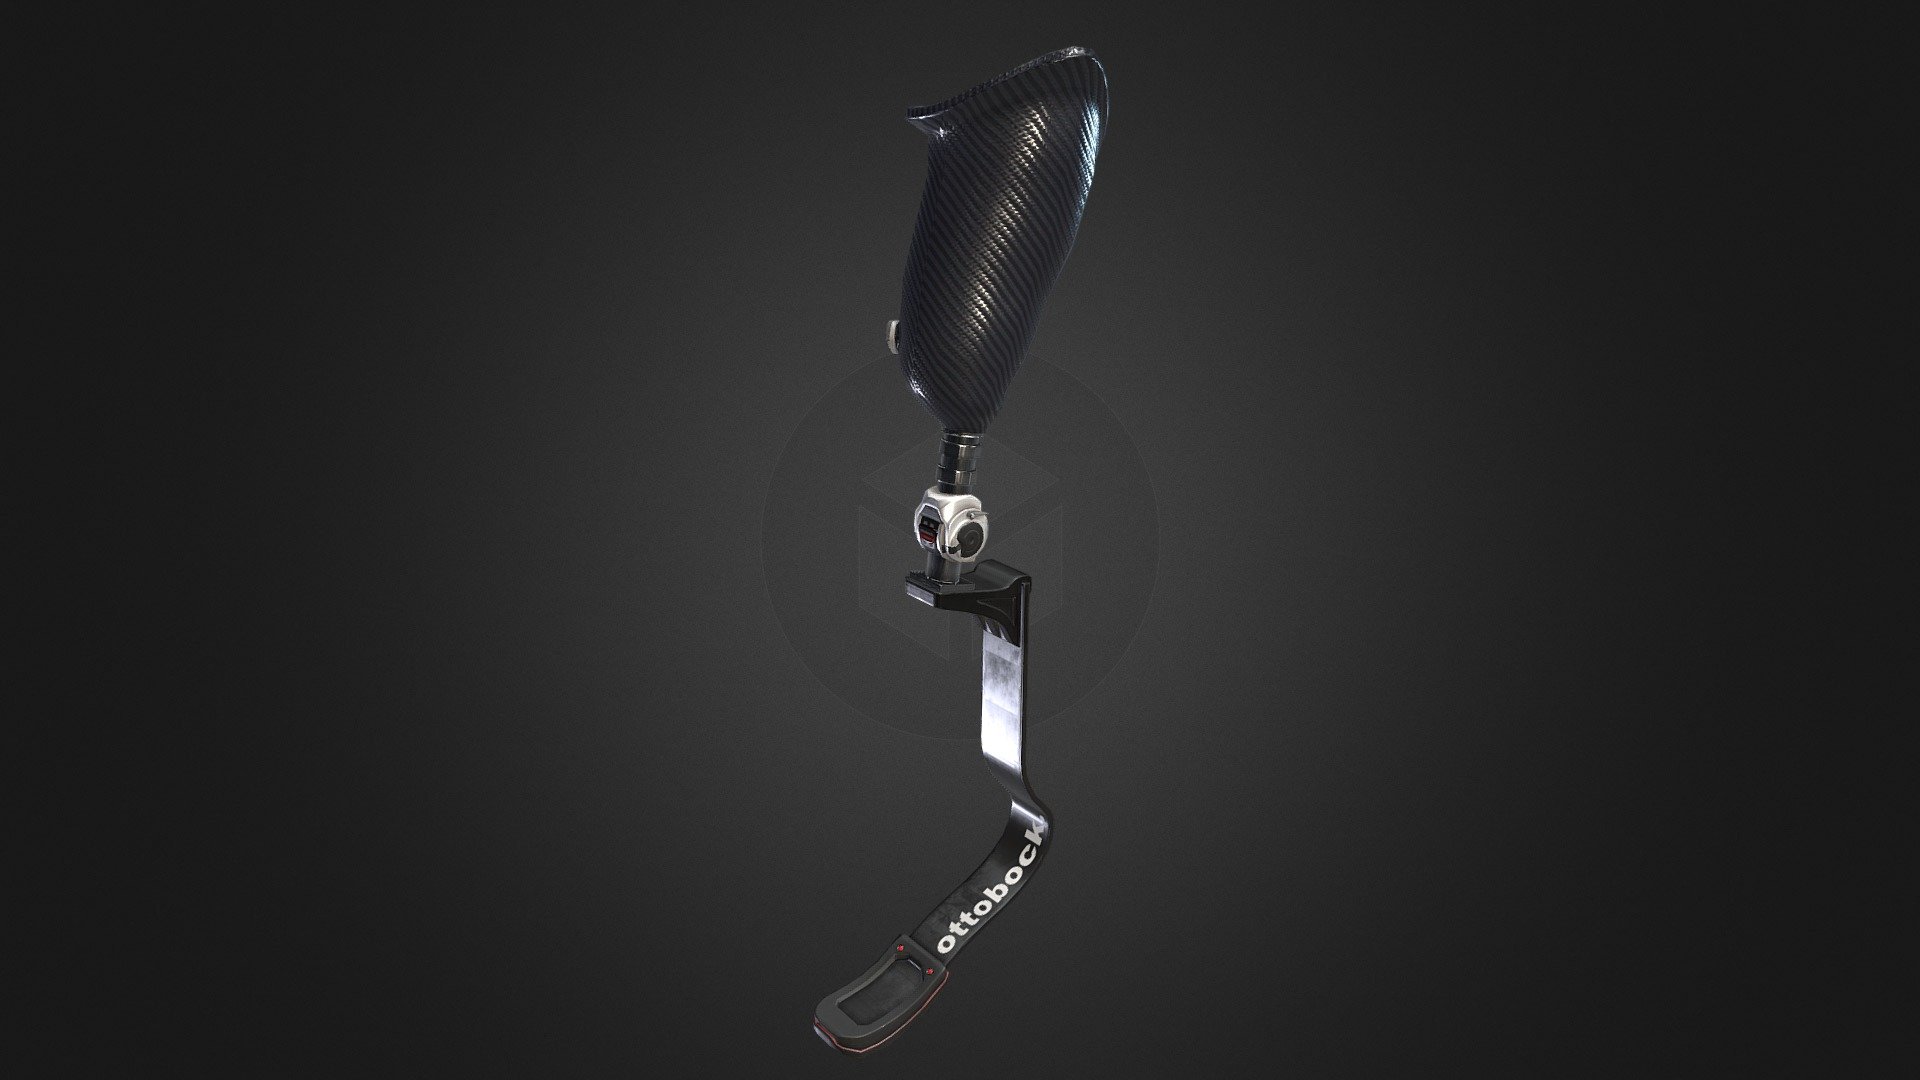 I made this &lsquo;Prosthetic leg' as an assignment for Game Asset Pipeline in Digital Arts and Entertainment (Kortrijk).

The &lsquo;Ottobock. fitness prosthesis' was my reference.
Here is a link to the ArtStation page: https://www.artstation.com/artwork/rNDwJ - Prosthetic leg - 3D model by Allan De Paepe (@AllanDePaepe) 3d model